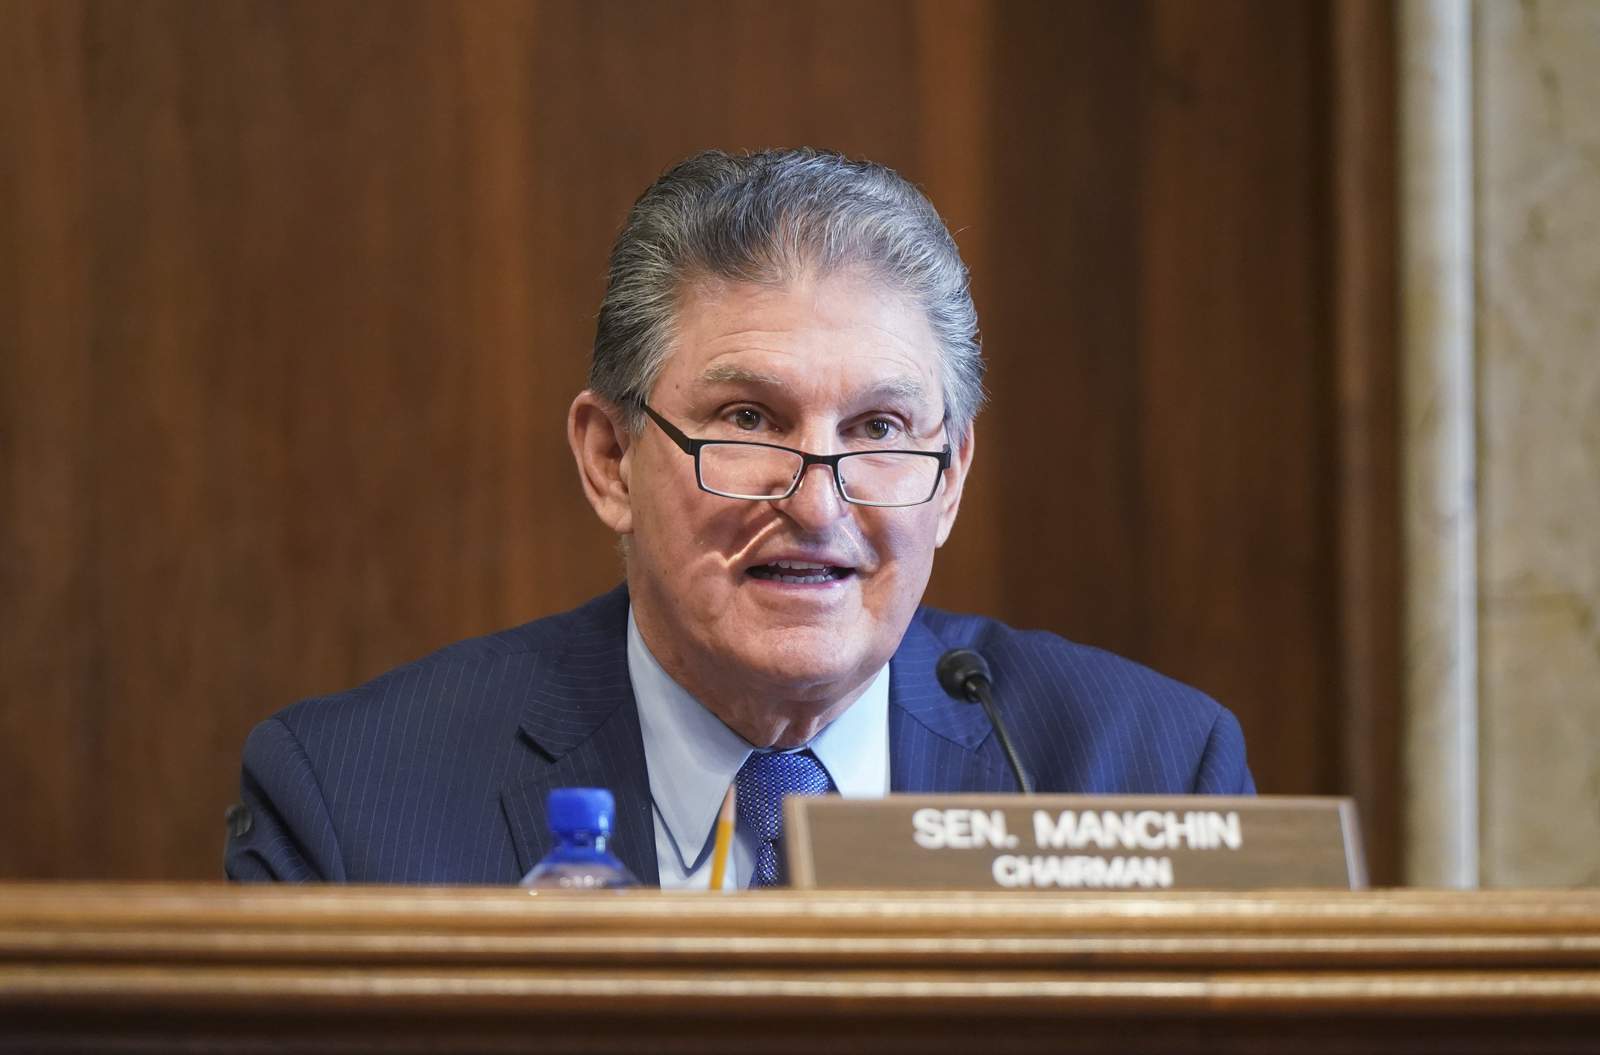 Manchin says he'll vote for Haaland for interior secretary